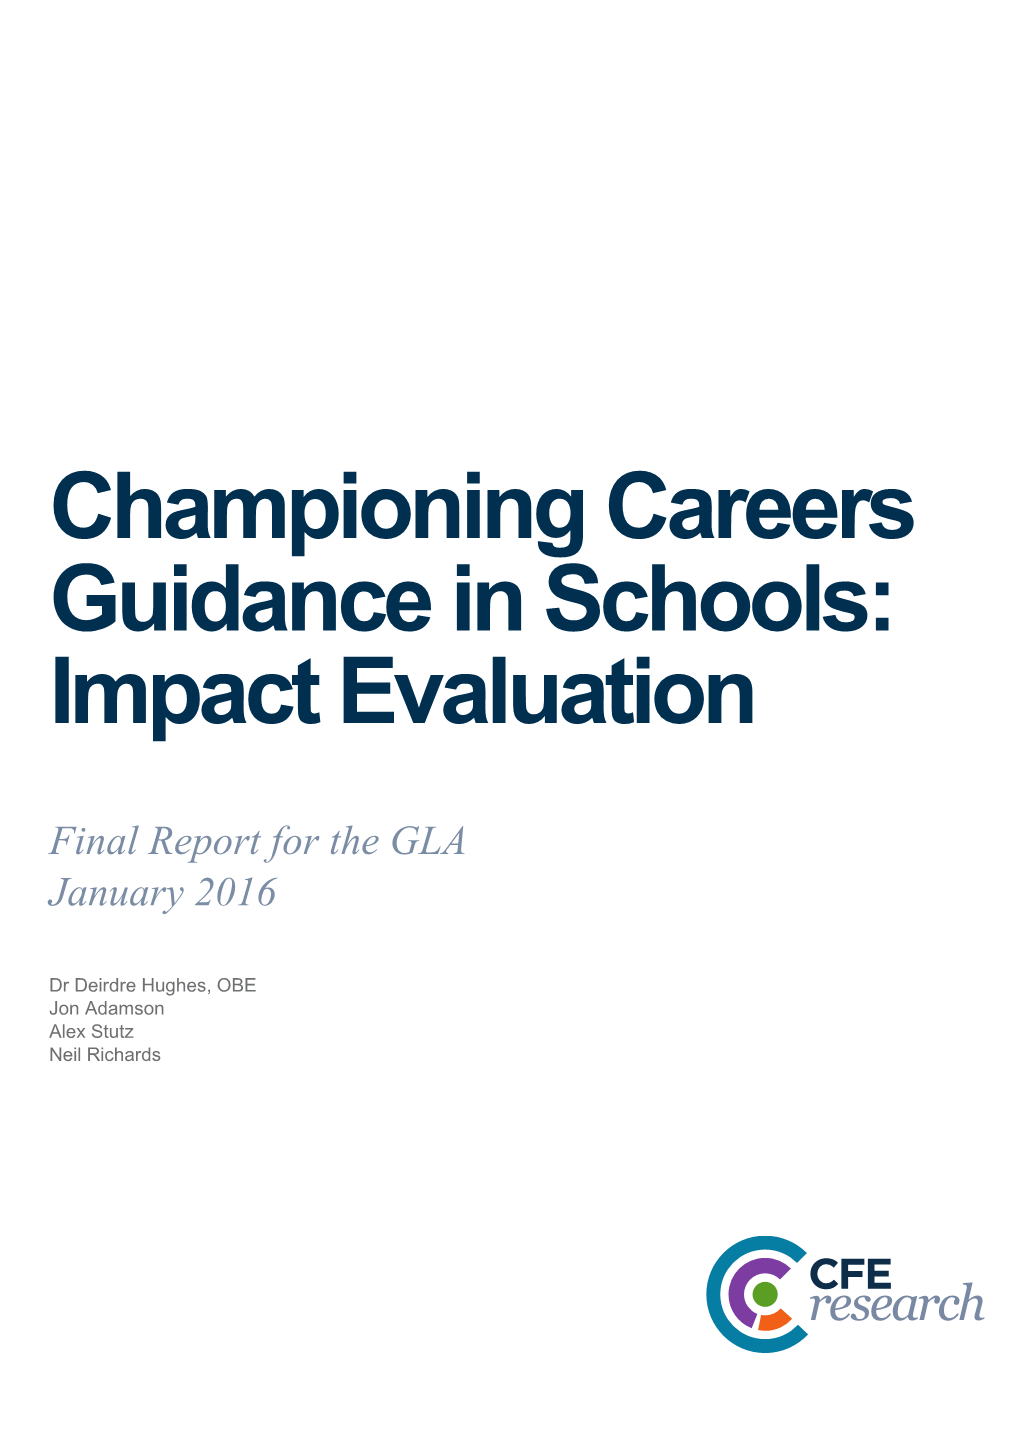 Championing Careers Guidance in Schools: Impact Evaluation